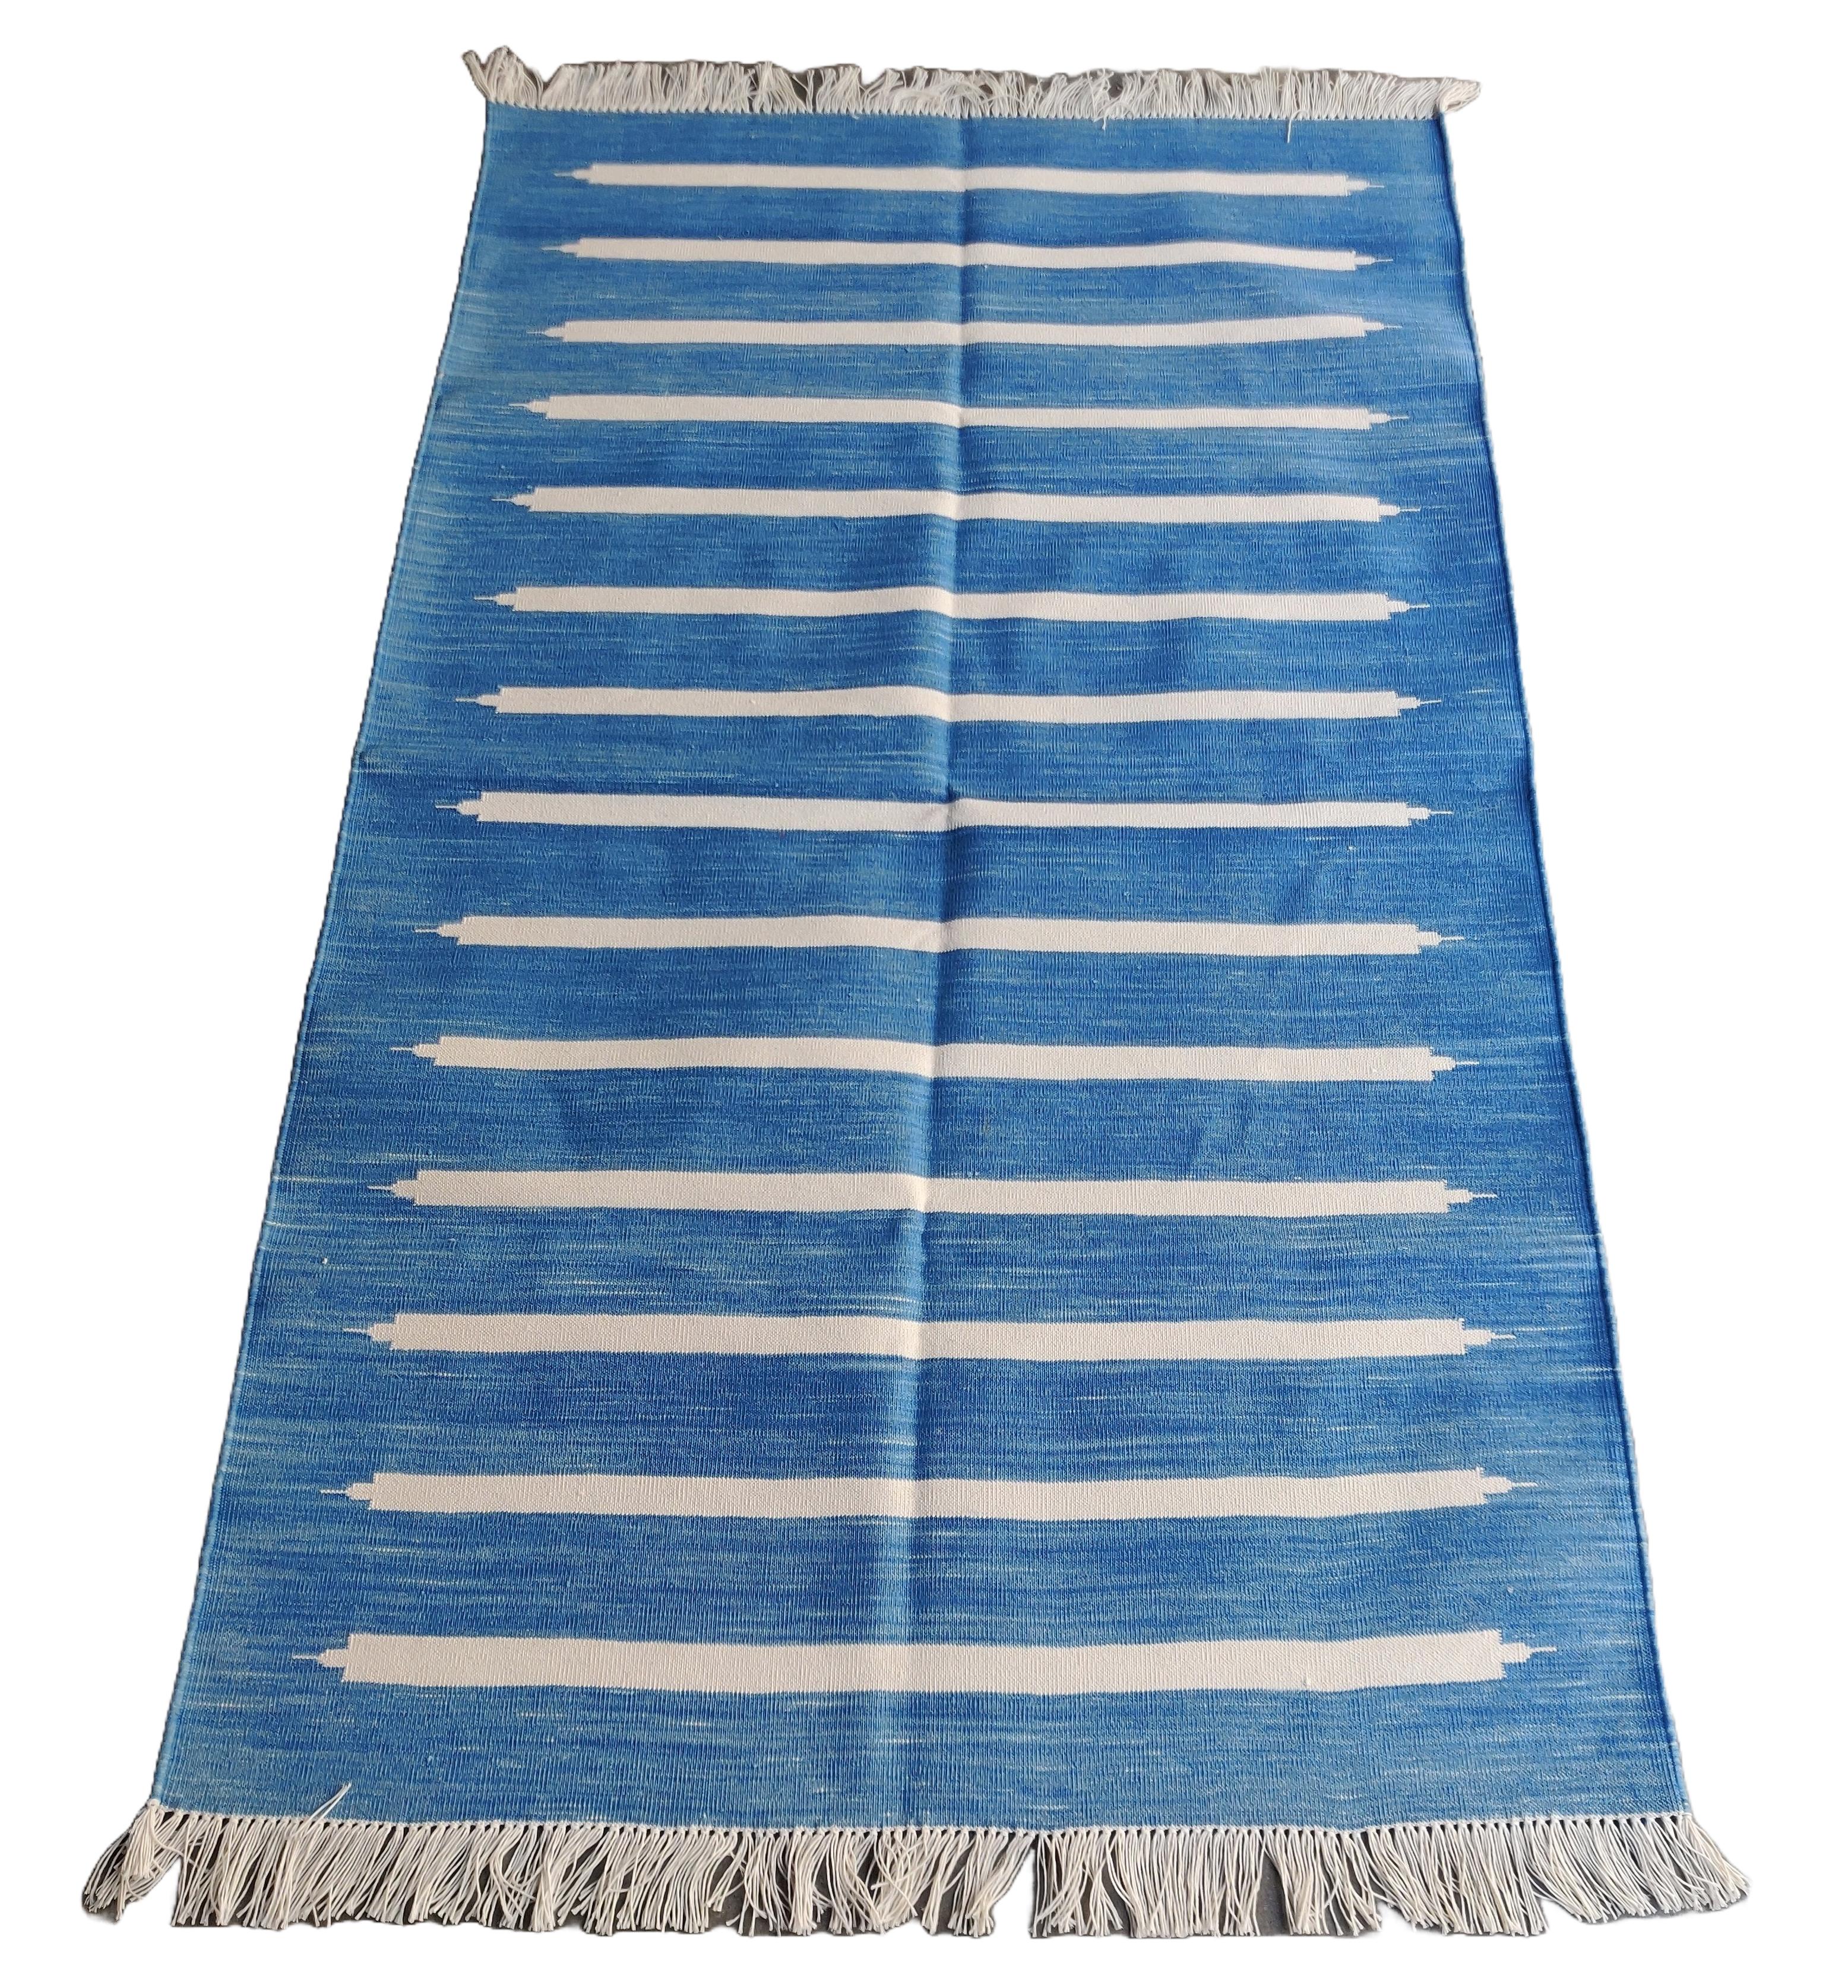 Mid-Century Modern Handmade Cotton Area Flat Weave Rug, 3x5 Blue And White Striped Indian Dhurrie For Sale